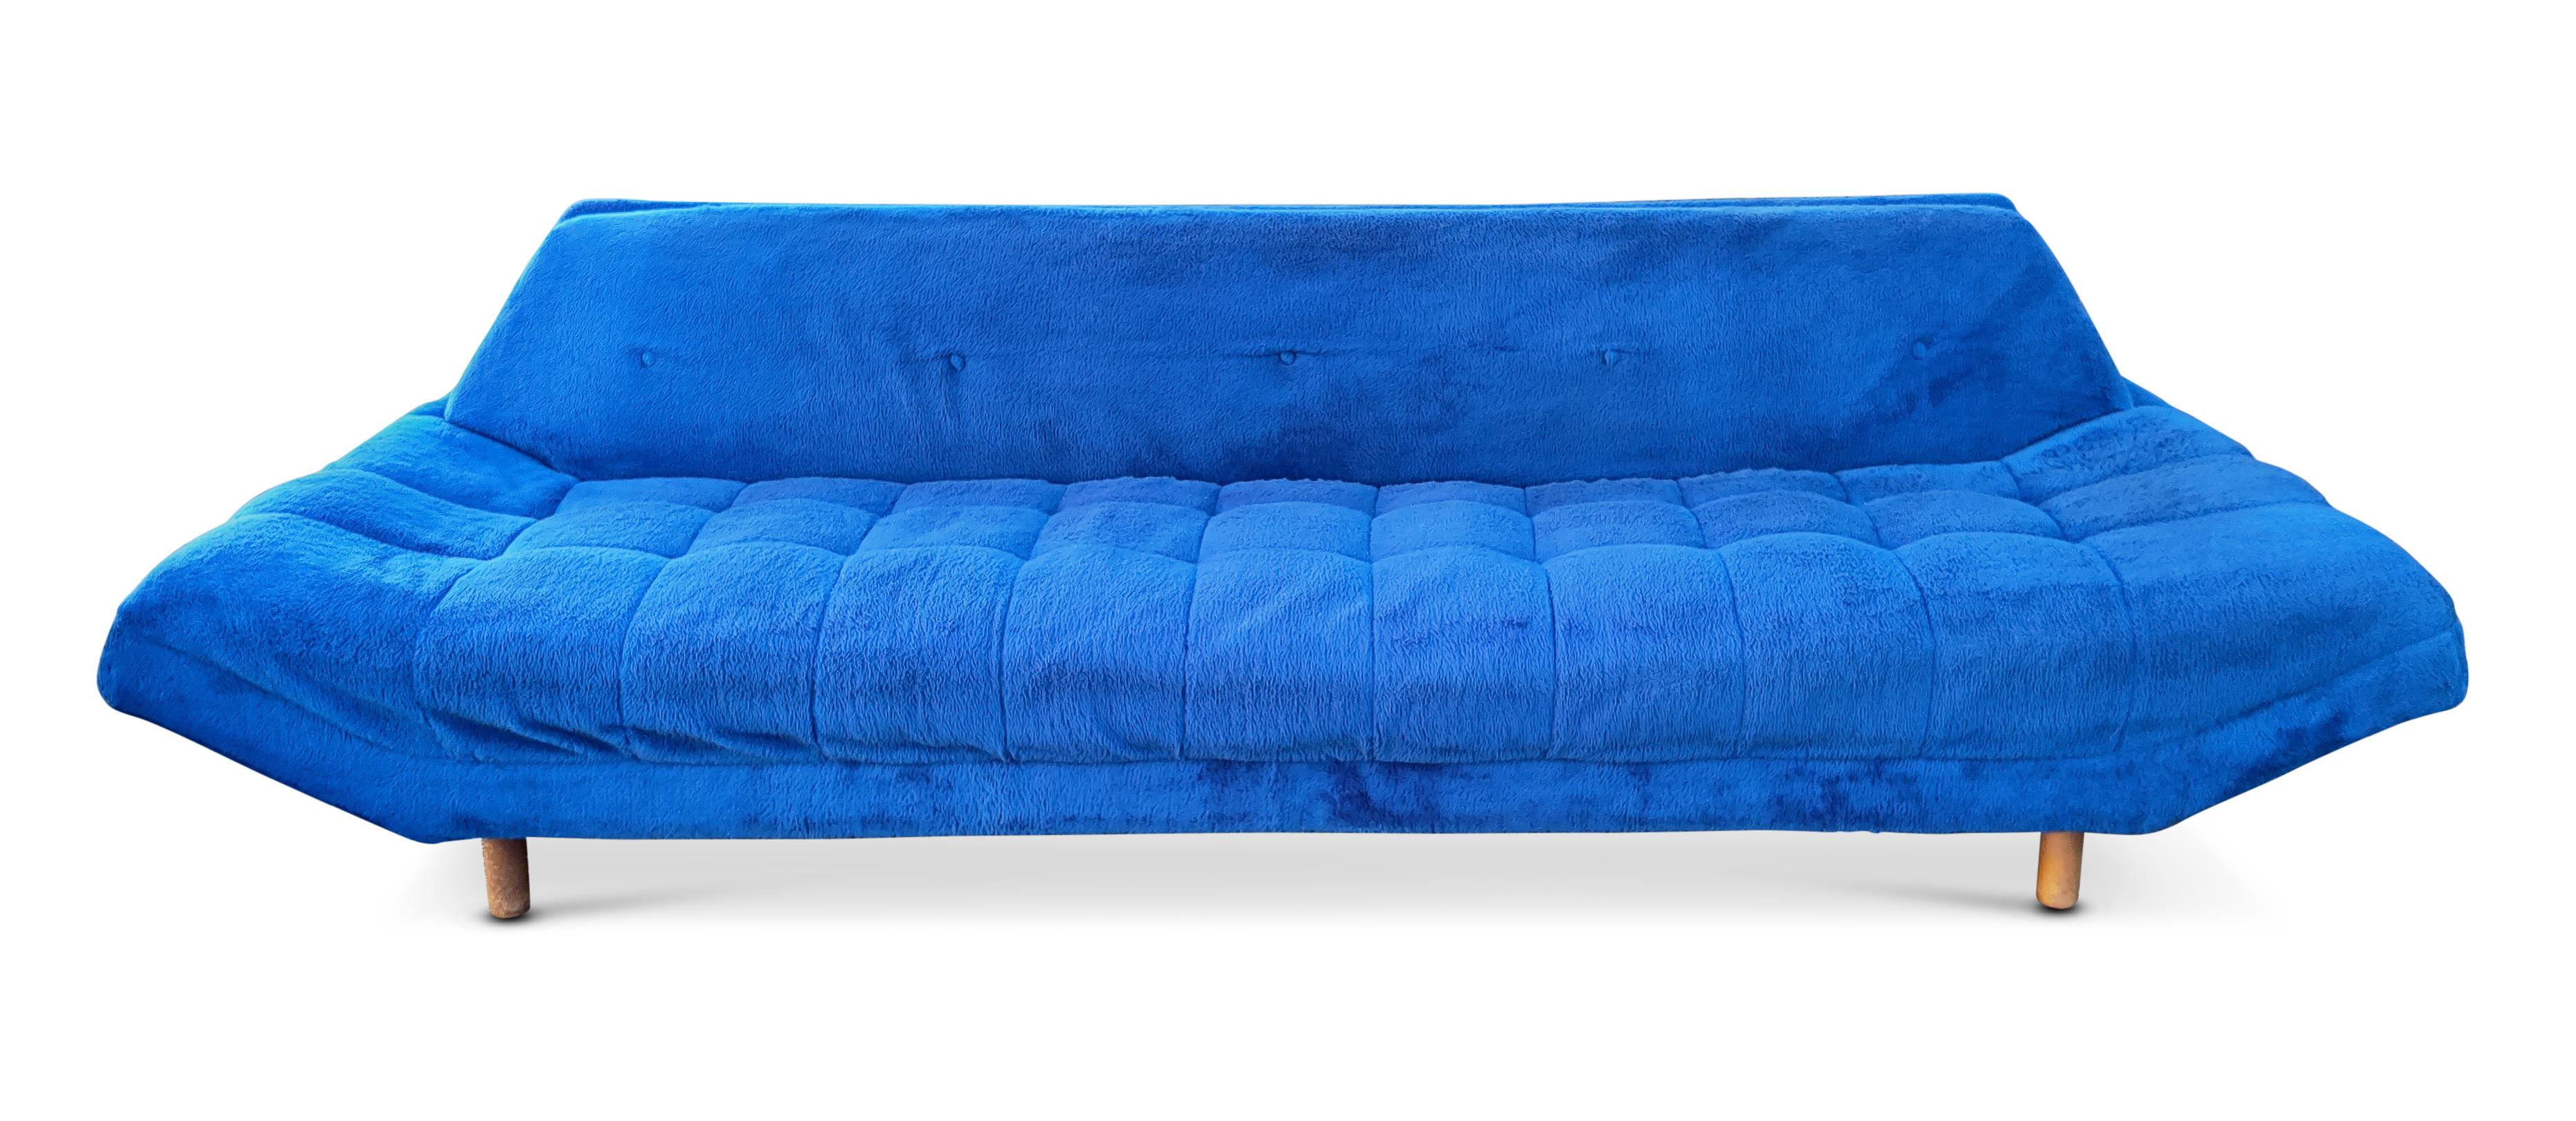 adrian pearsall gondola couch